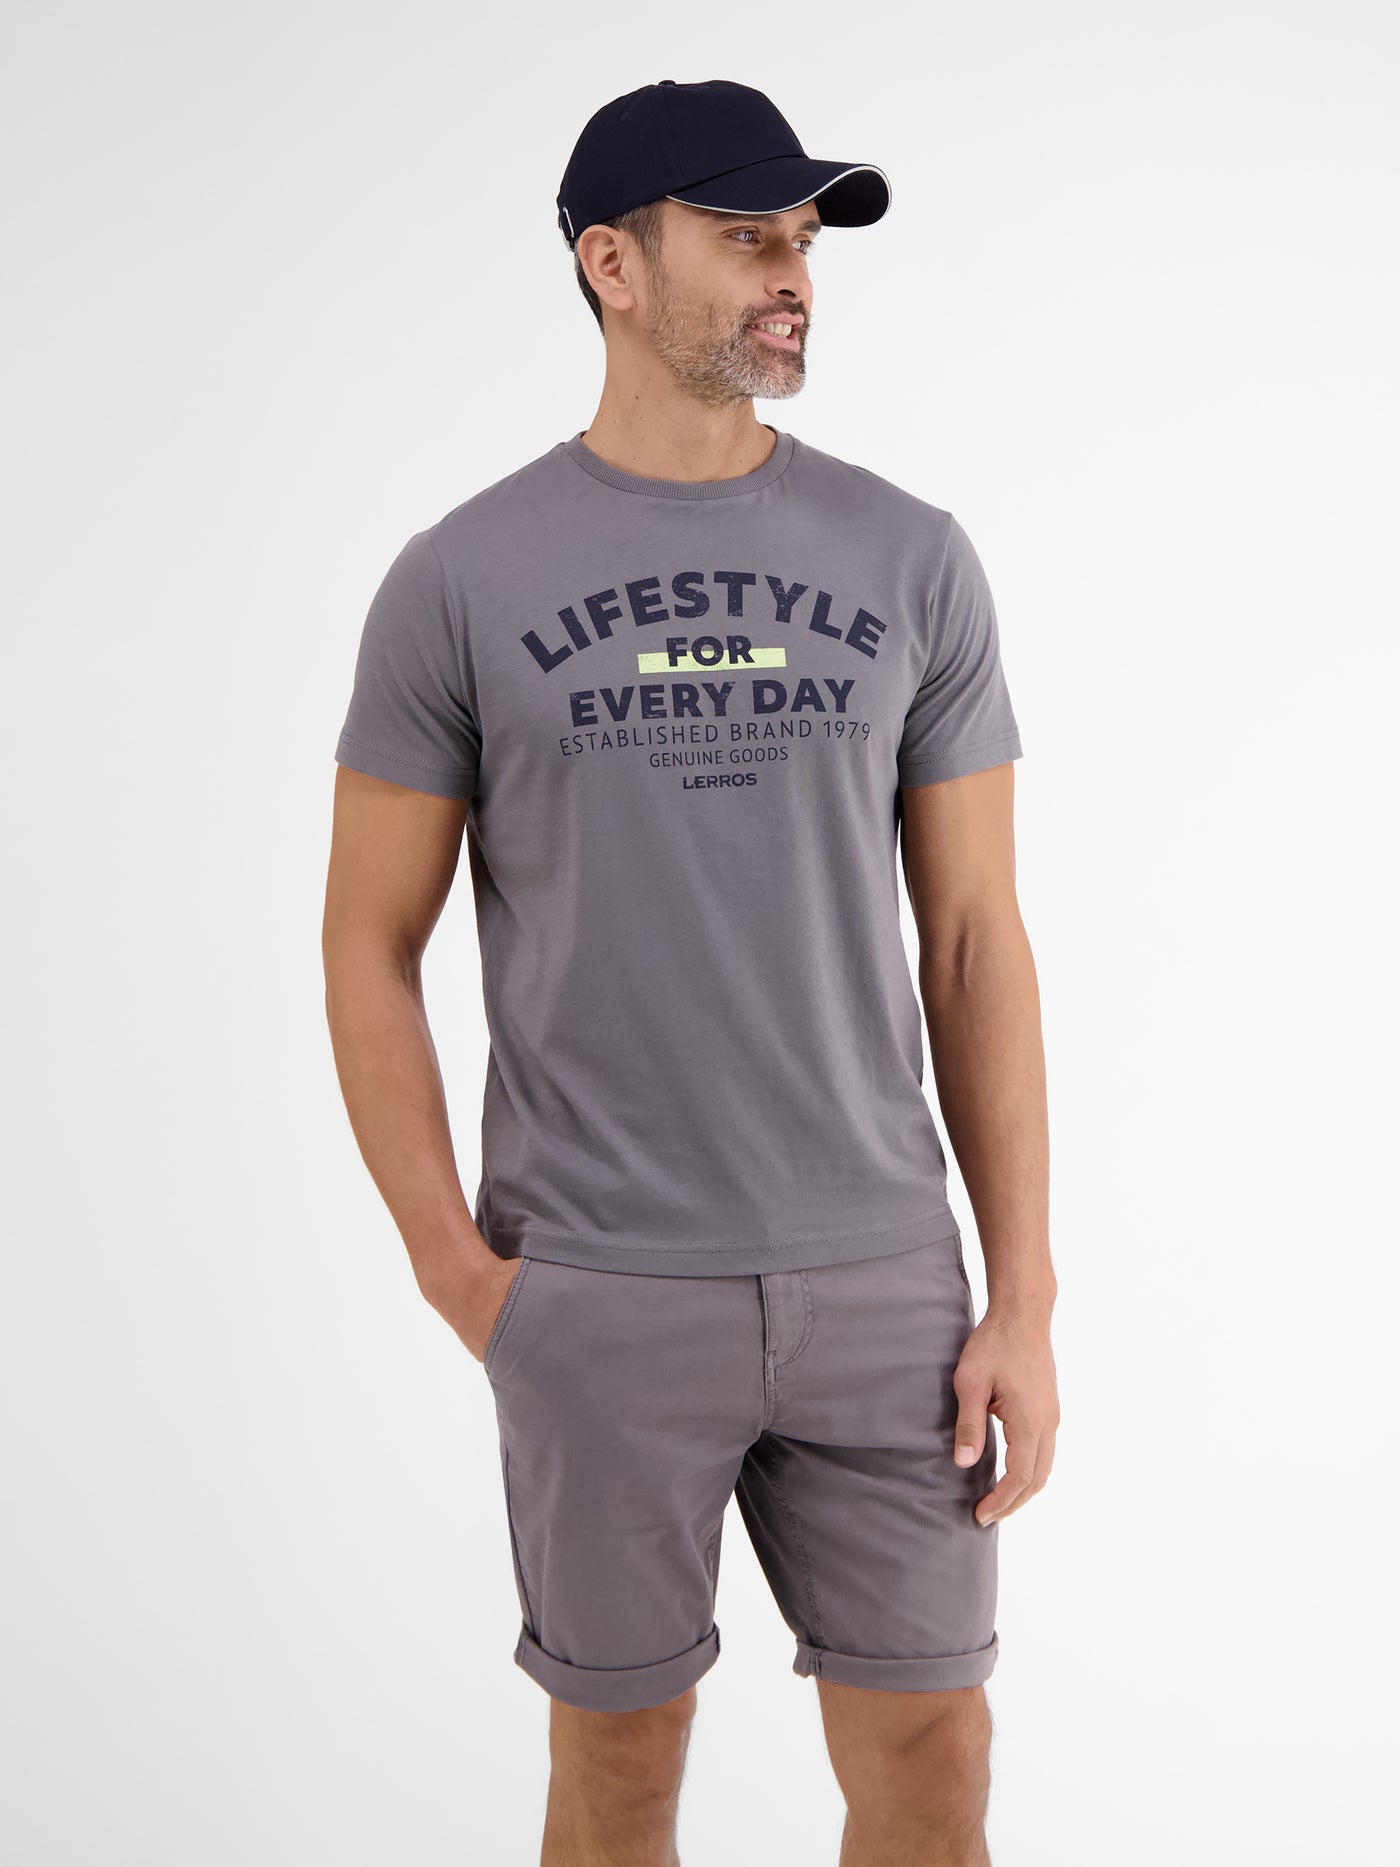 T-Shirt *Lifestyle for every day* SHOP – LERROS